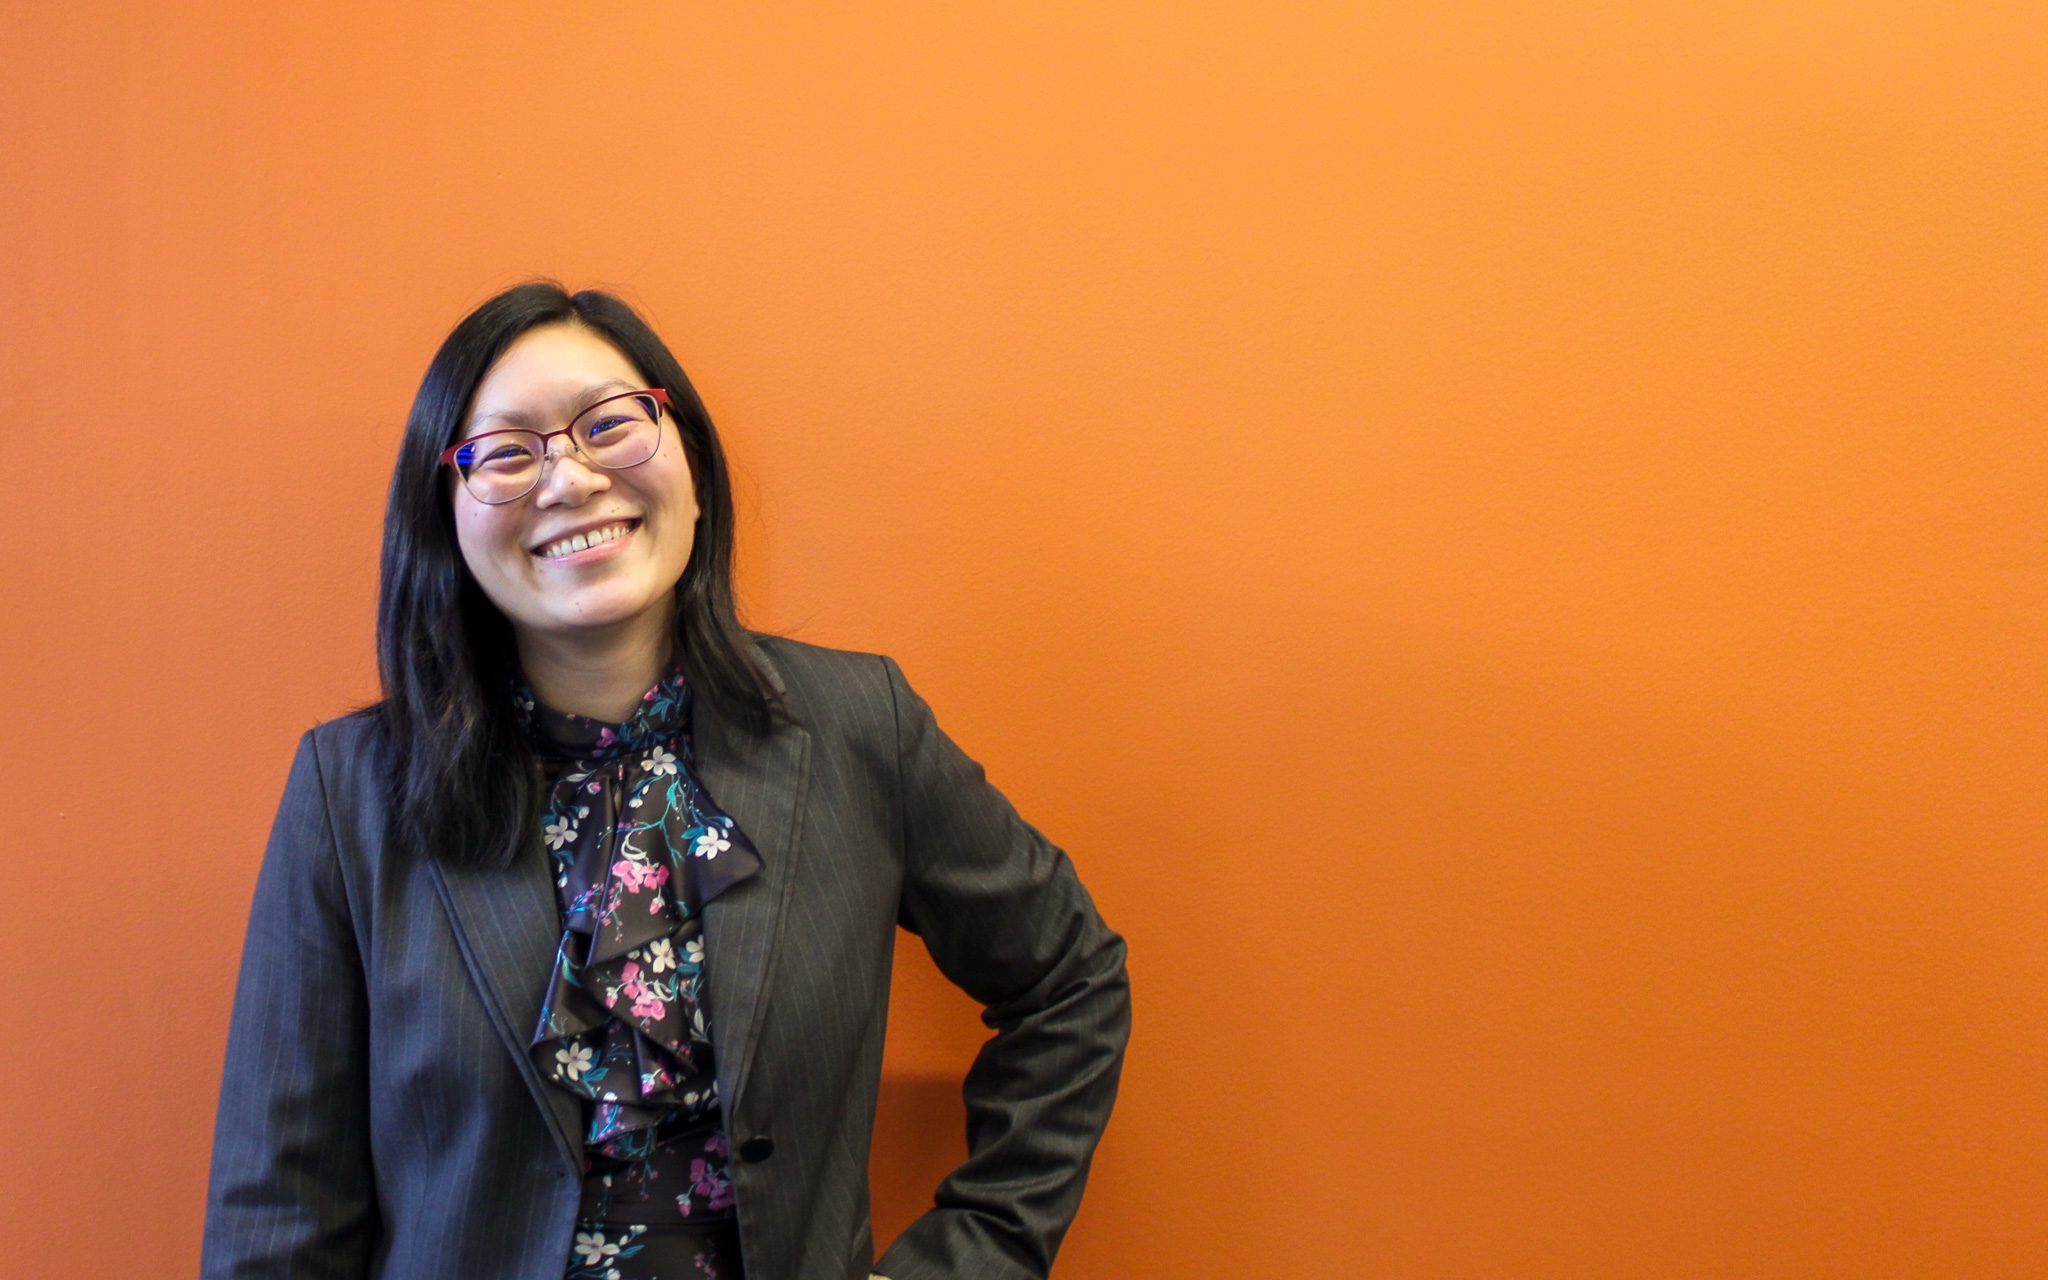 Amy Kuo, a person wearing a grey blazer and a floral dress stands against an orange background. The individual has dark hair that falls to their shoulders, and their posture is relaxed with one hand resting on their hip.